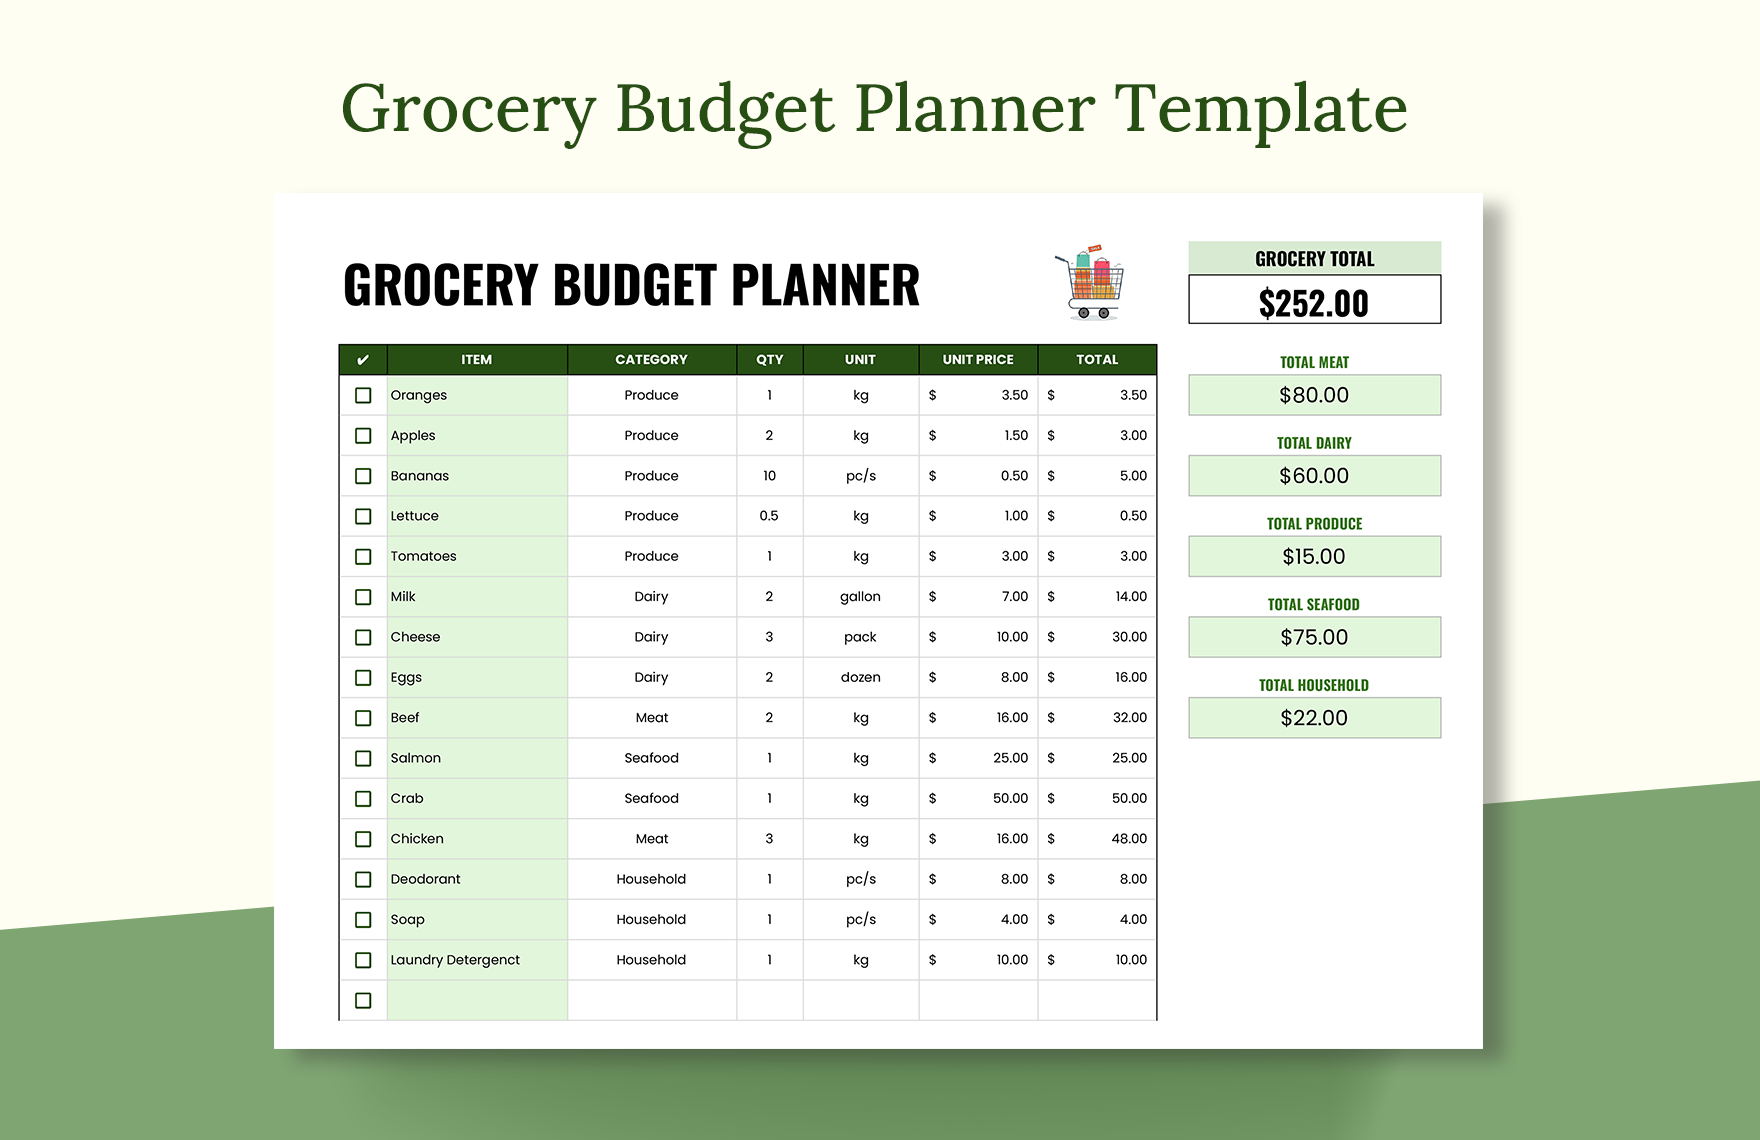 Grocery Budget Planner Template in Word, Google Docs, Excel, Google Sheets, Apple Pages